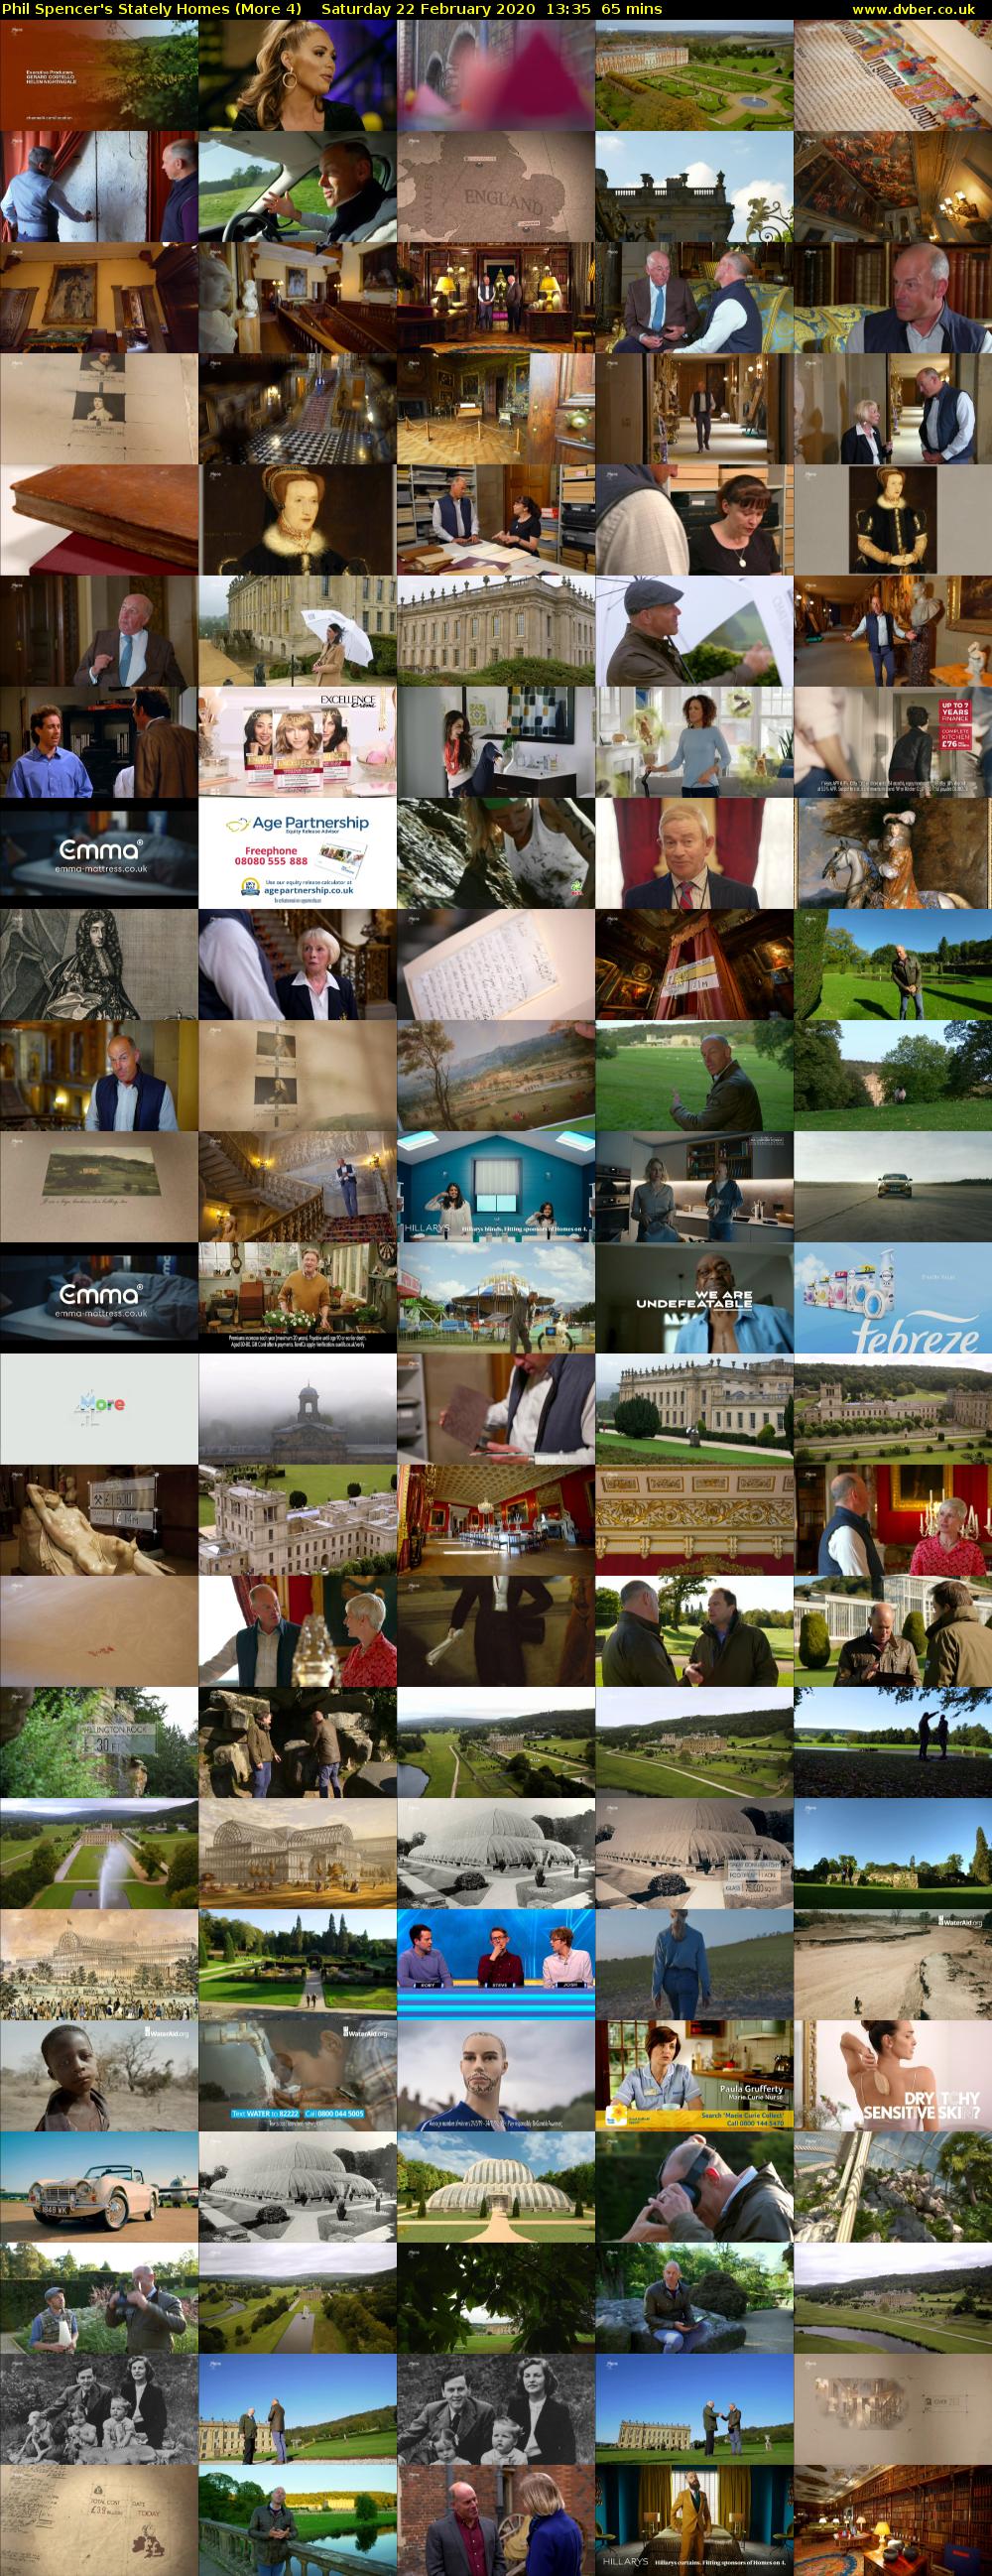 Phil Spencer's Stately Homes (More 4) Saturday 22 February 2020 13:35 - 14:40